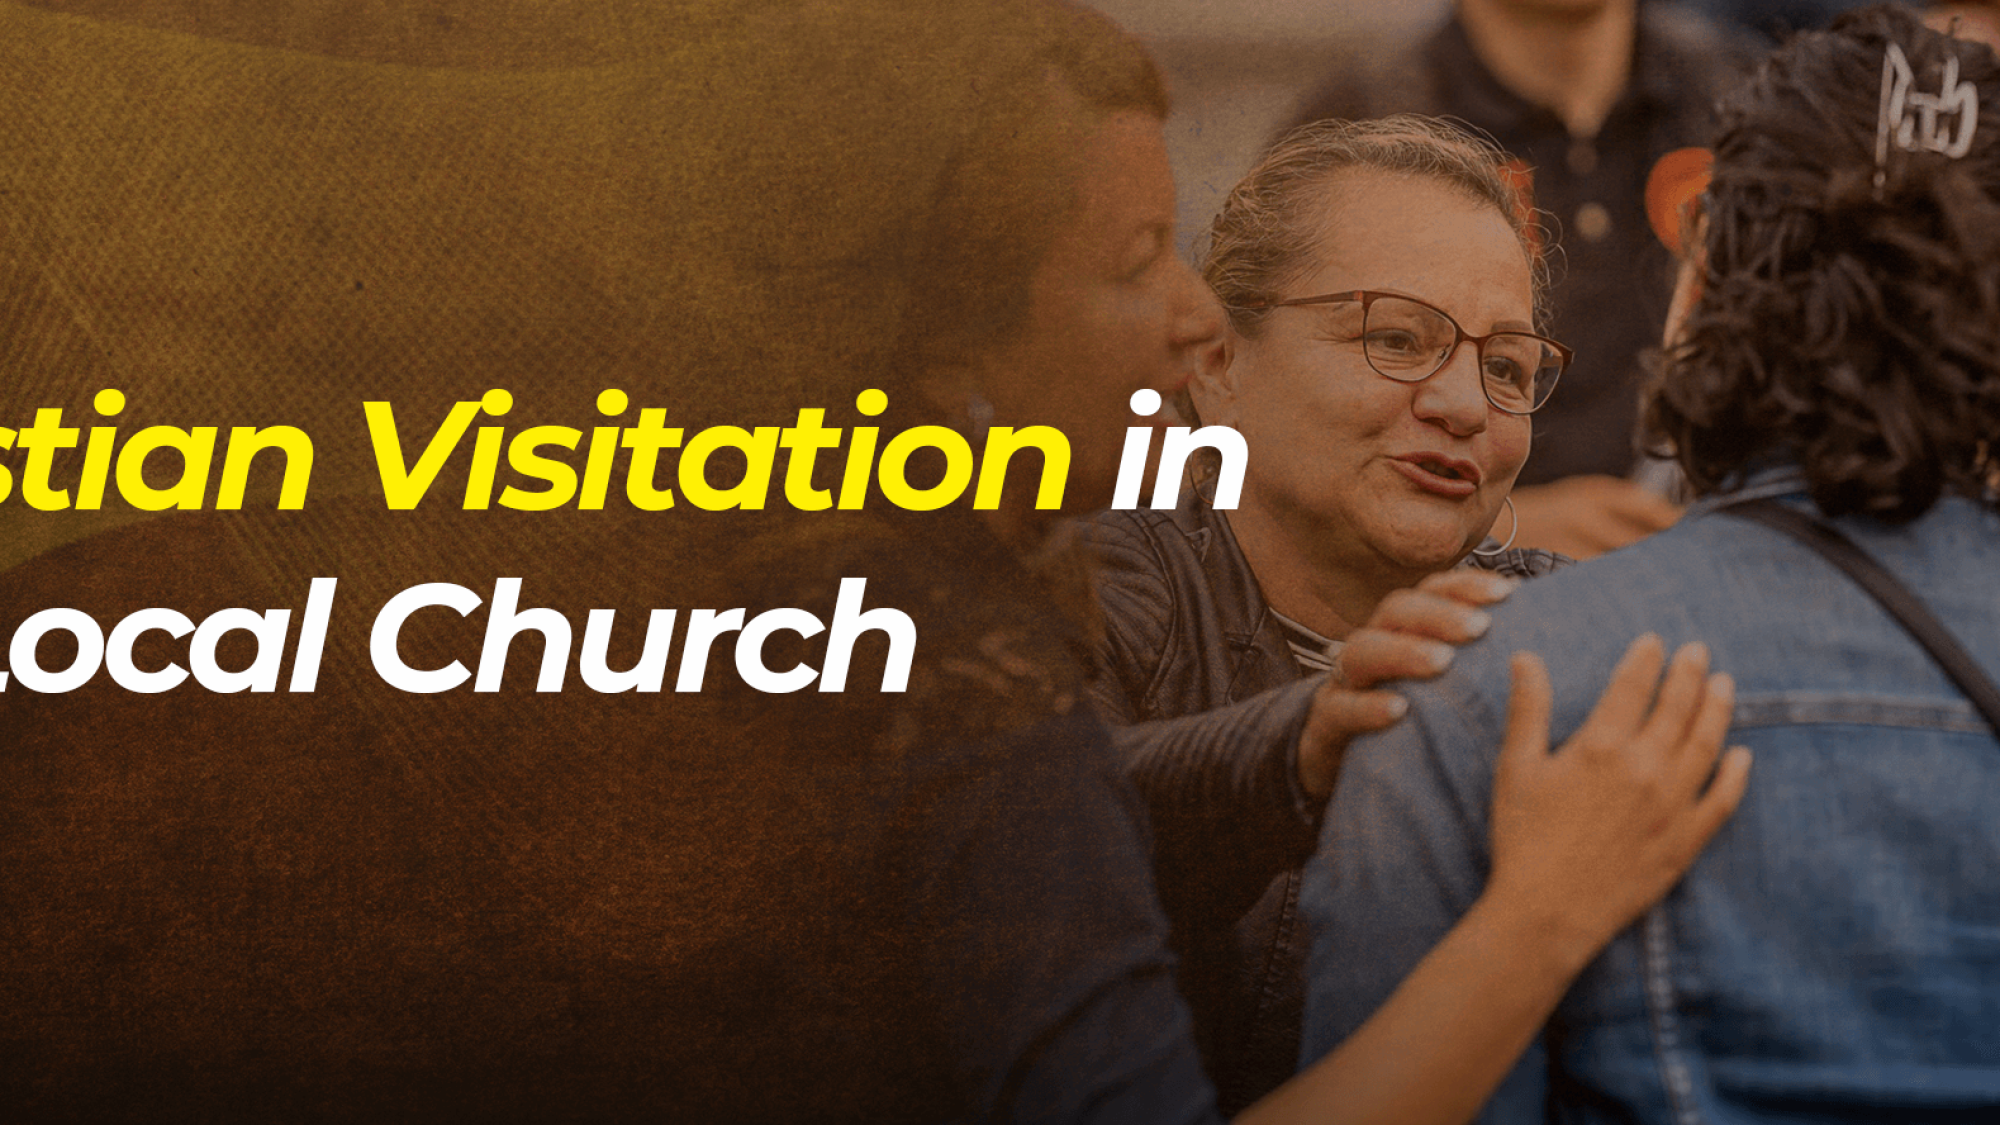 Christian Visitation In The Local Church